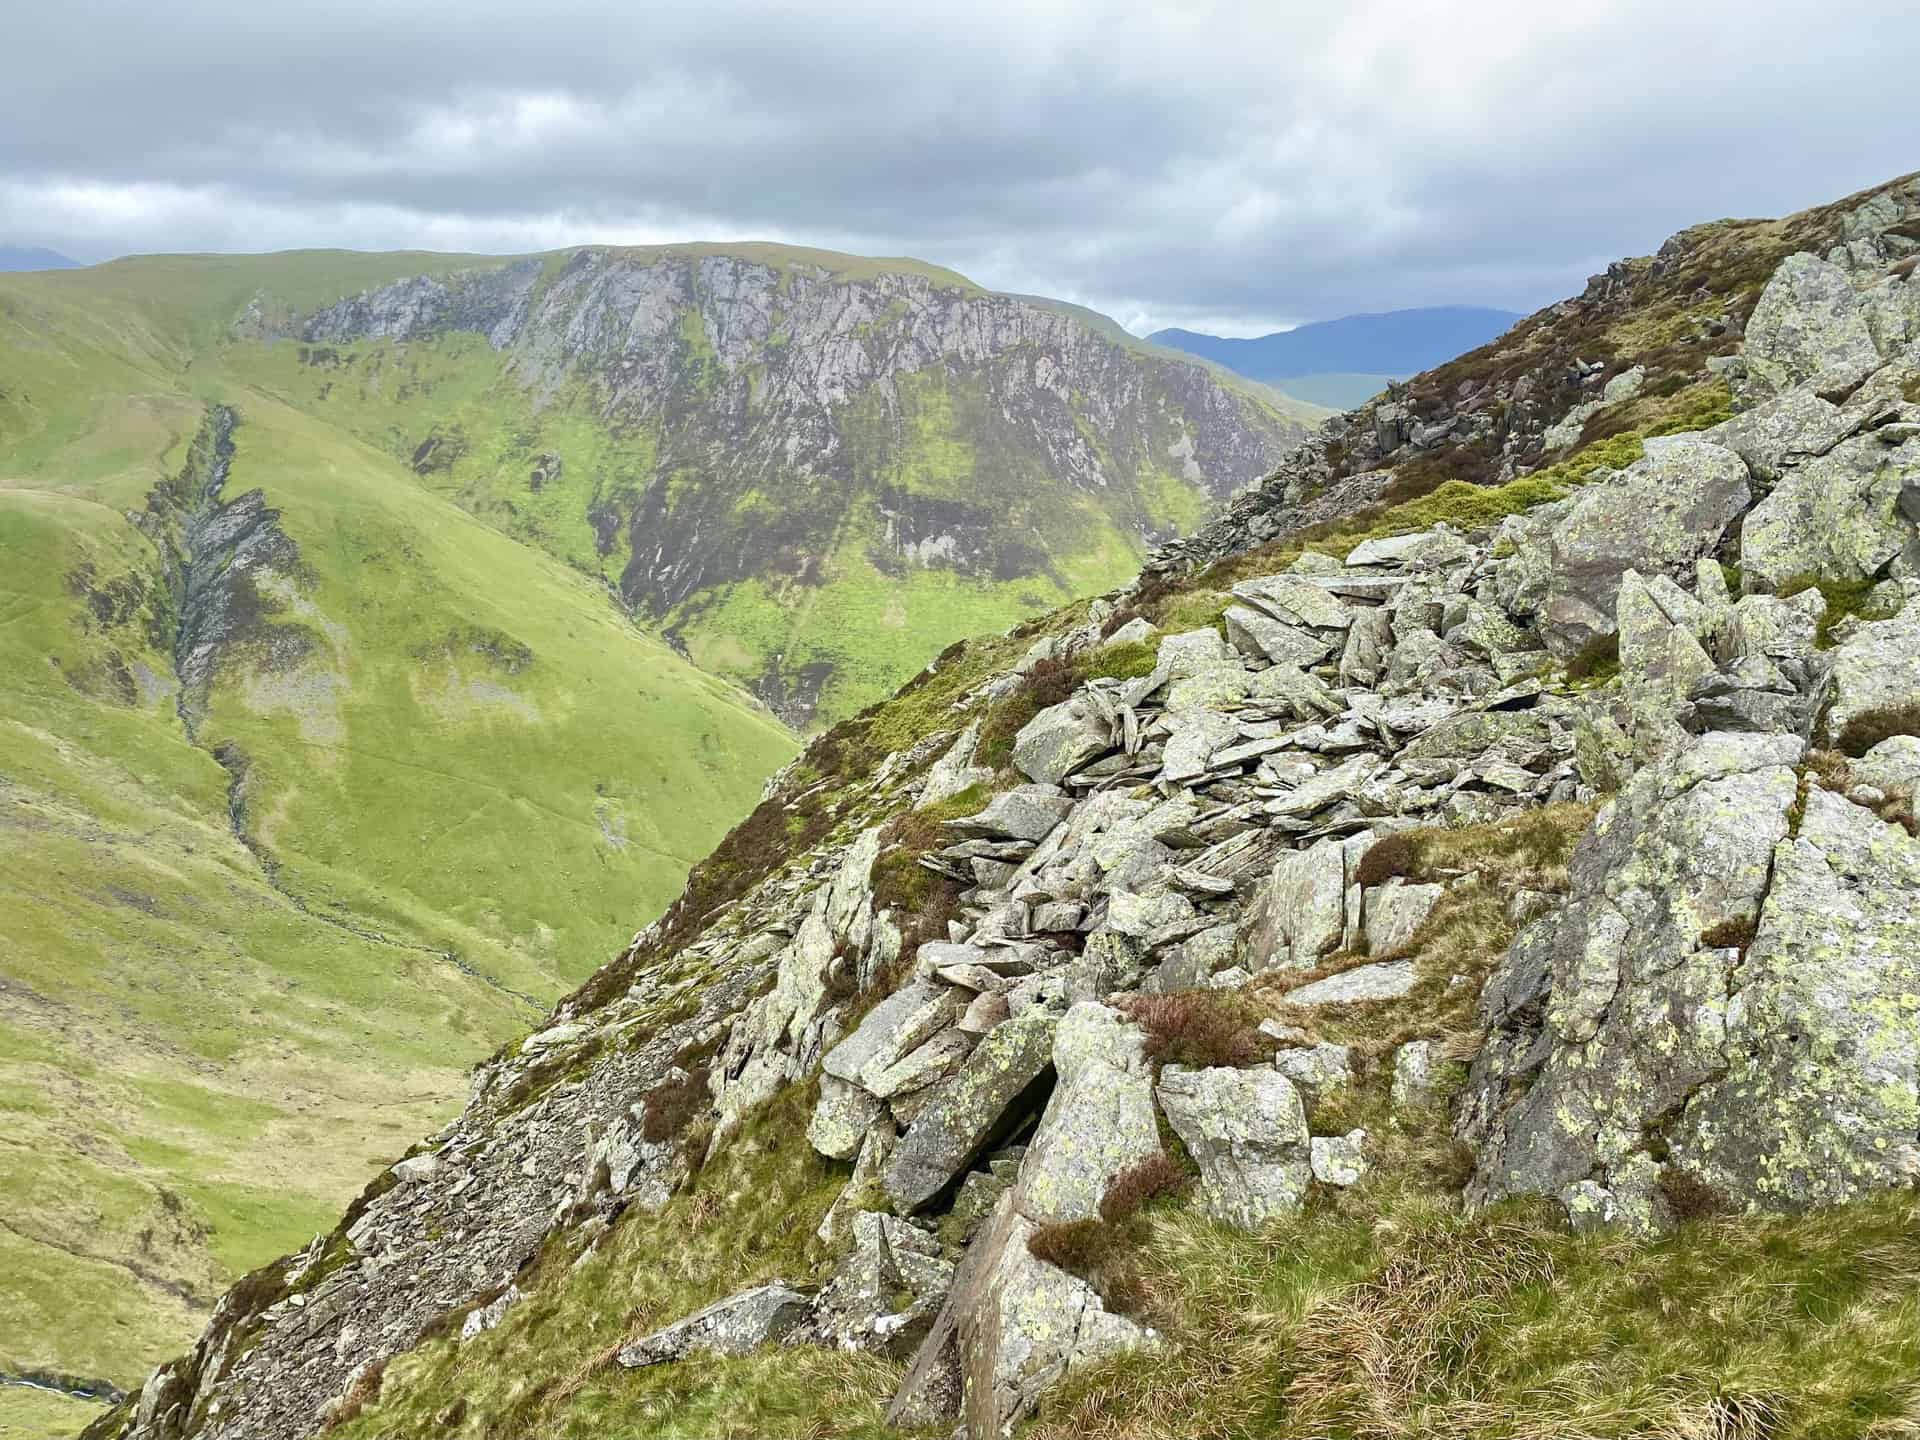 The view of Hindscarth Crags from the southern flanks of High Spy. The deep cut in the rocky landscape (on the left in both pictures) has been created by Far Tongue Gill, a tributary of Newlands Beck.